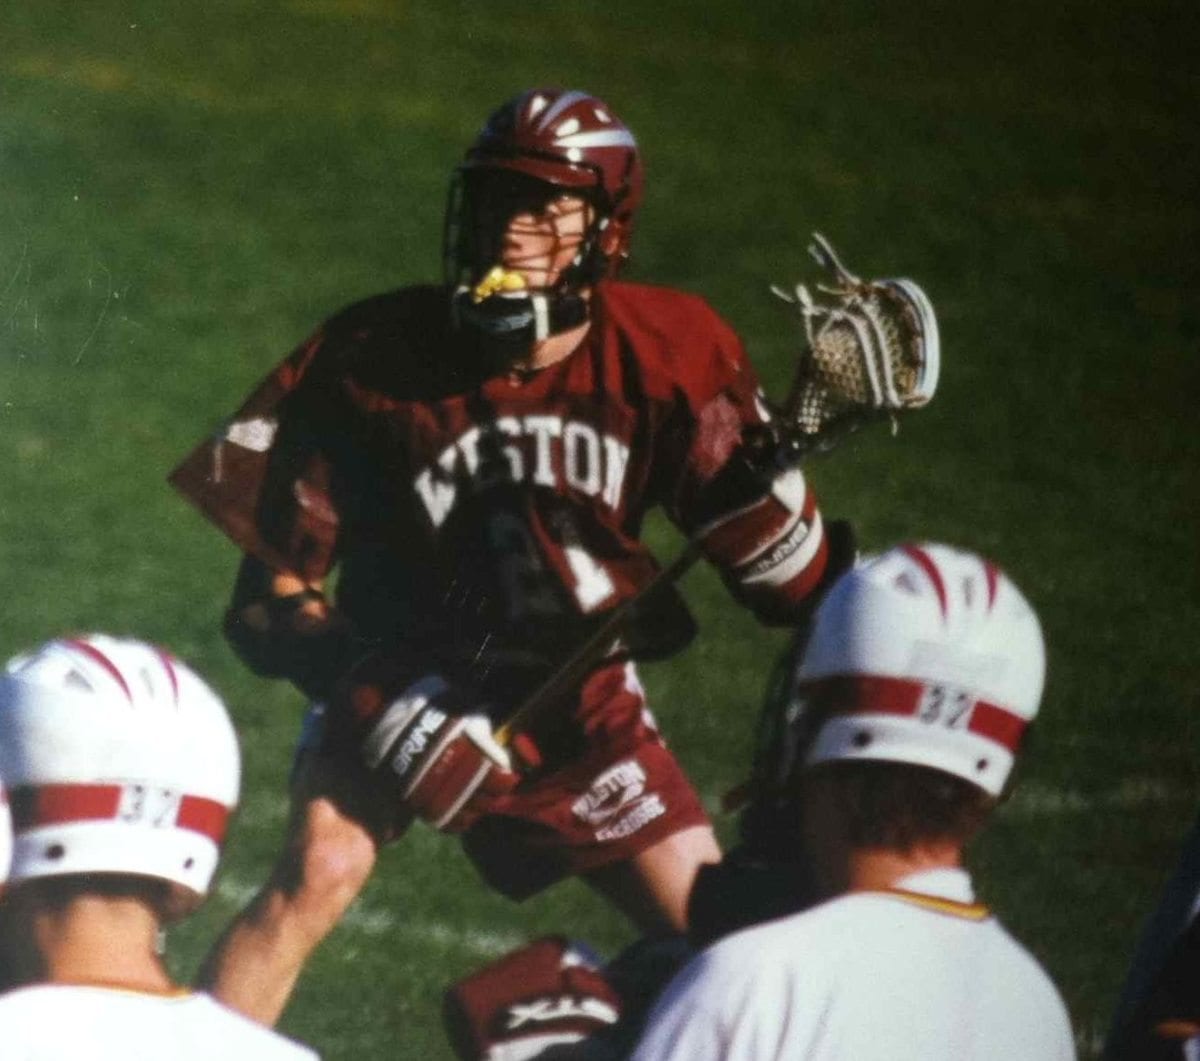 Connor playing for Weston against Concord-Carlisle in 1999. Power cradle. lacrosse